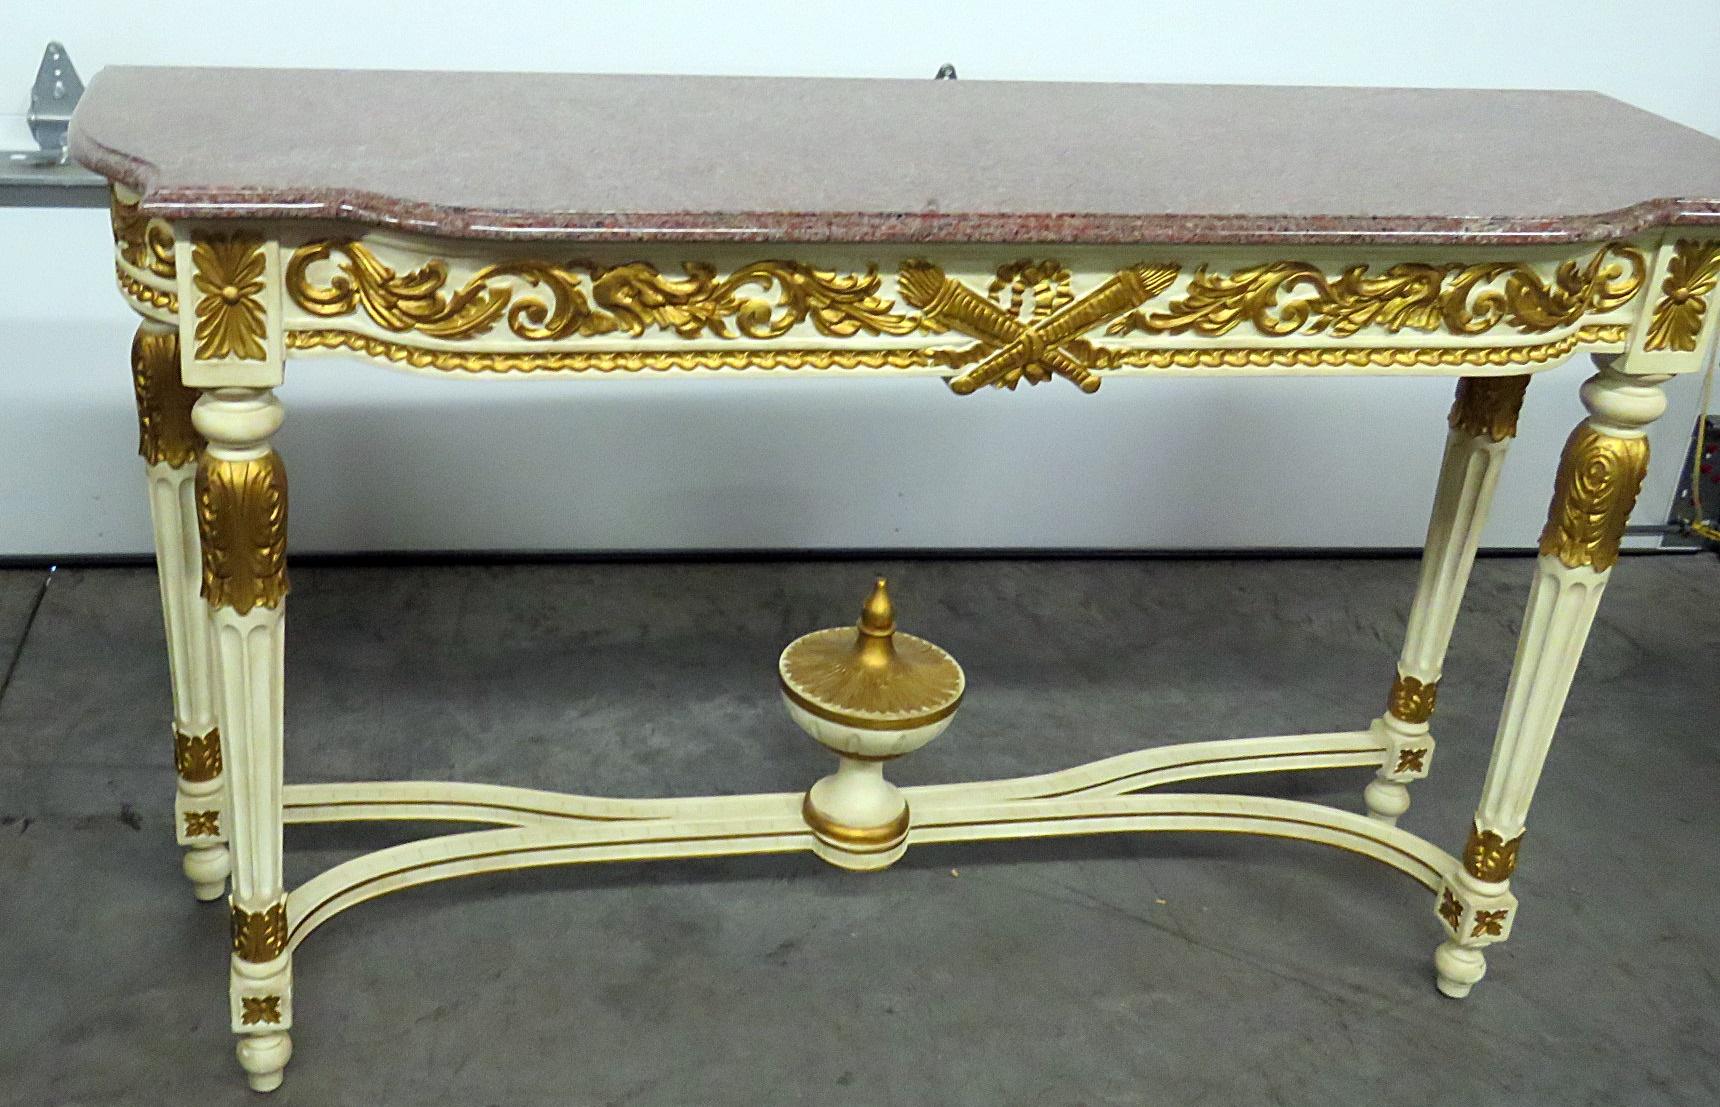 This is a gorgeous gilded and creme painted console table. The table features bright gold leaf over a painted ground and is in excellent vintage condition. This is quintessential Louis XVI styling and will add opulence to any home.